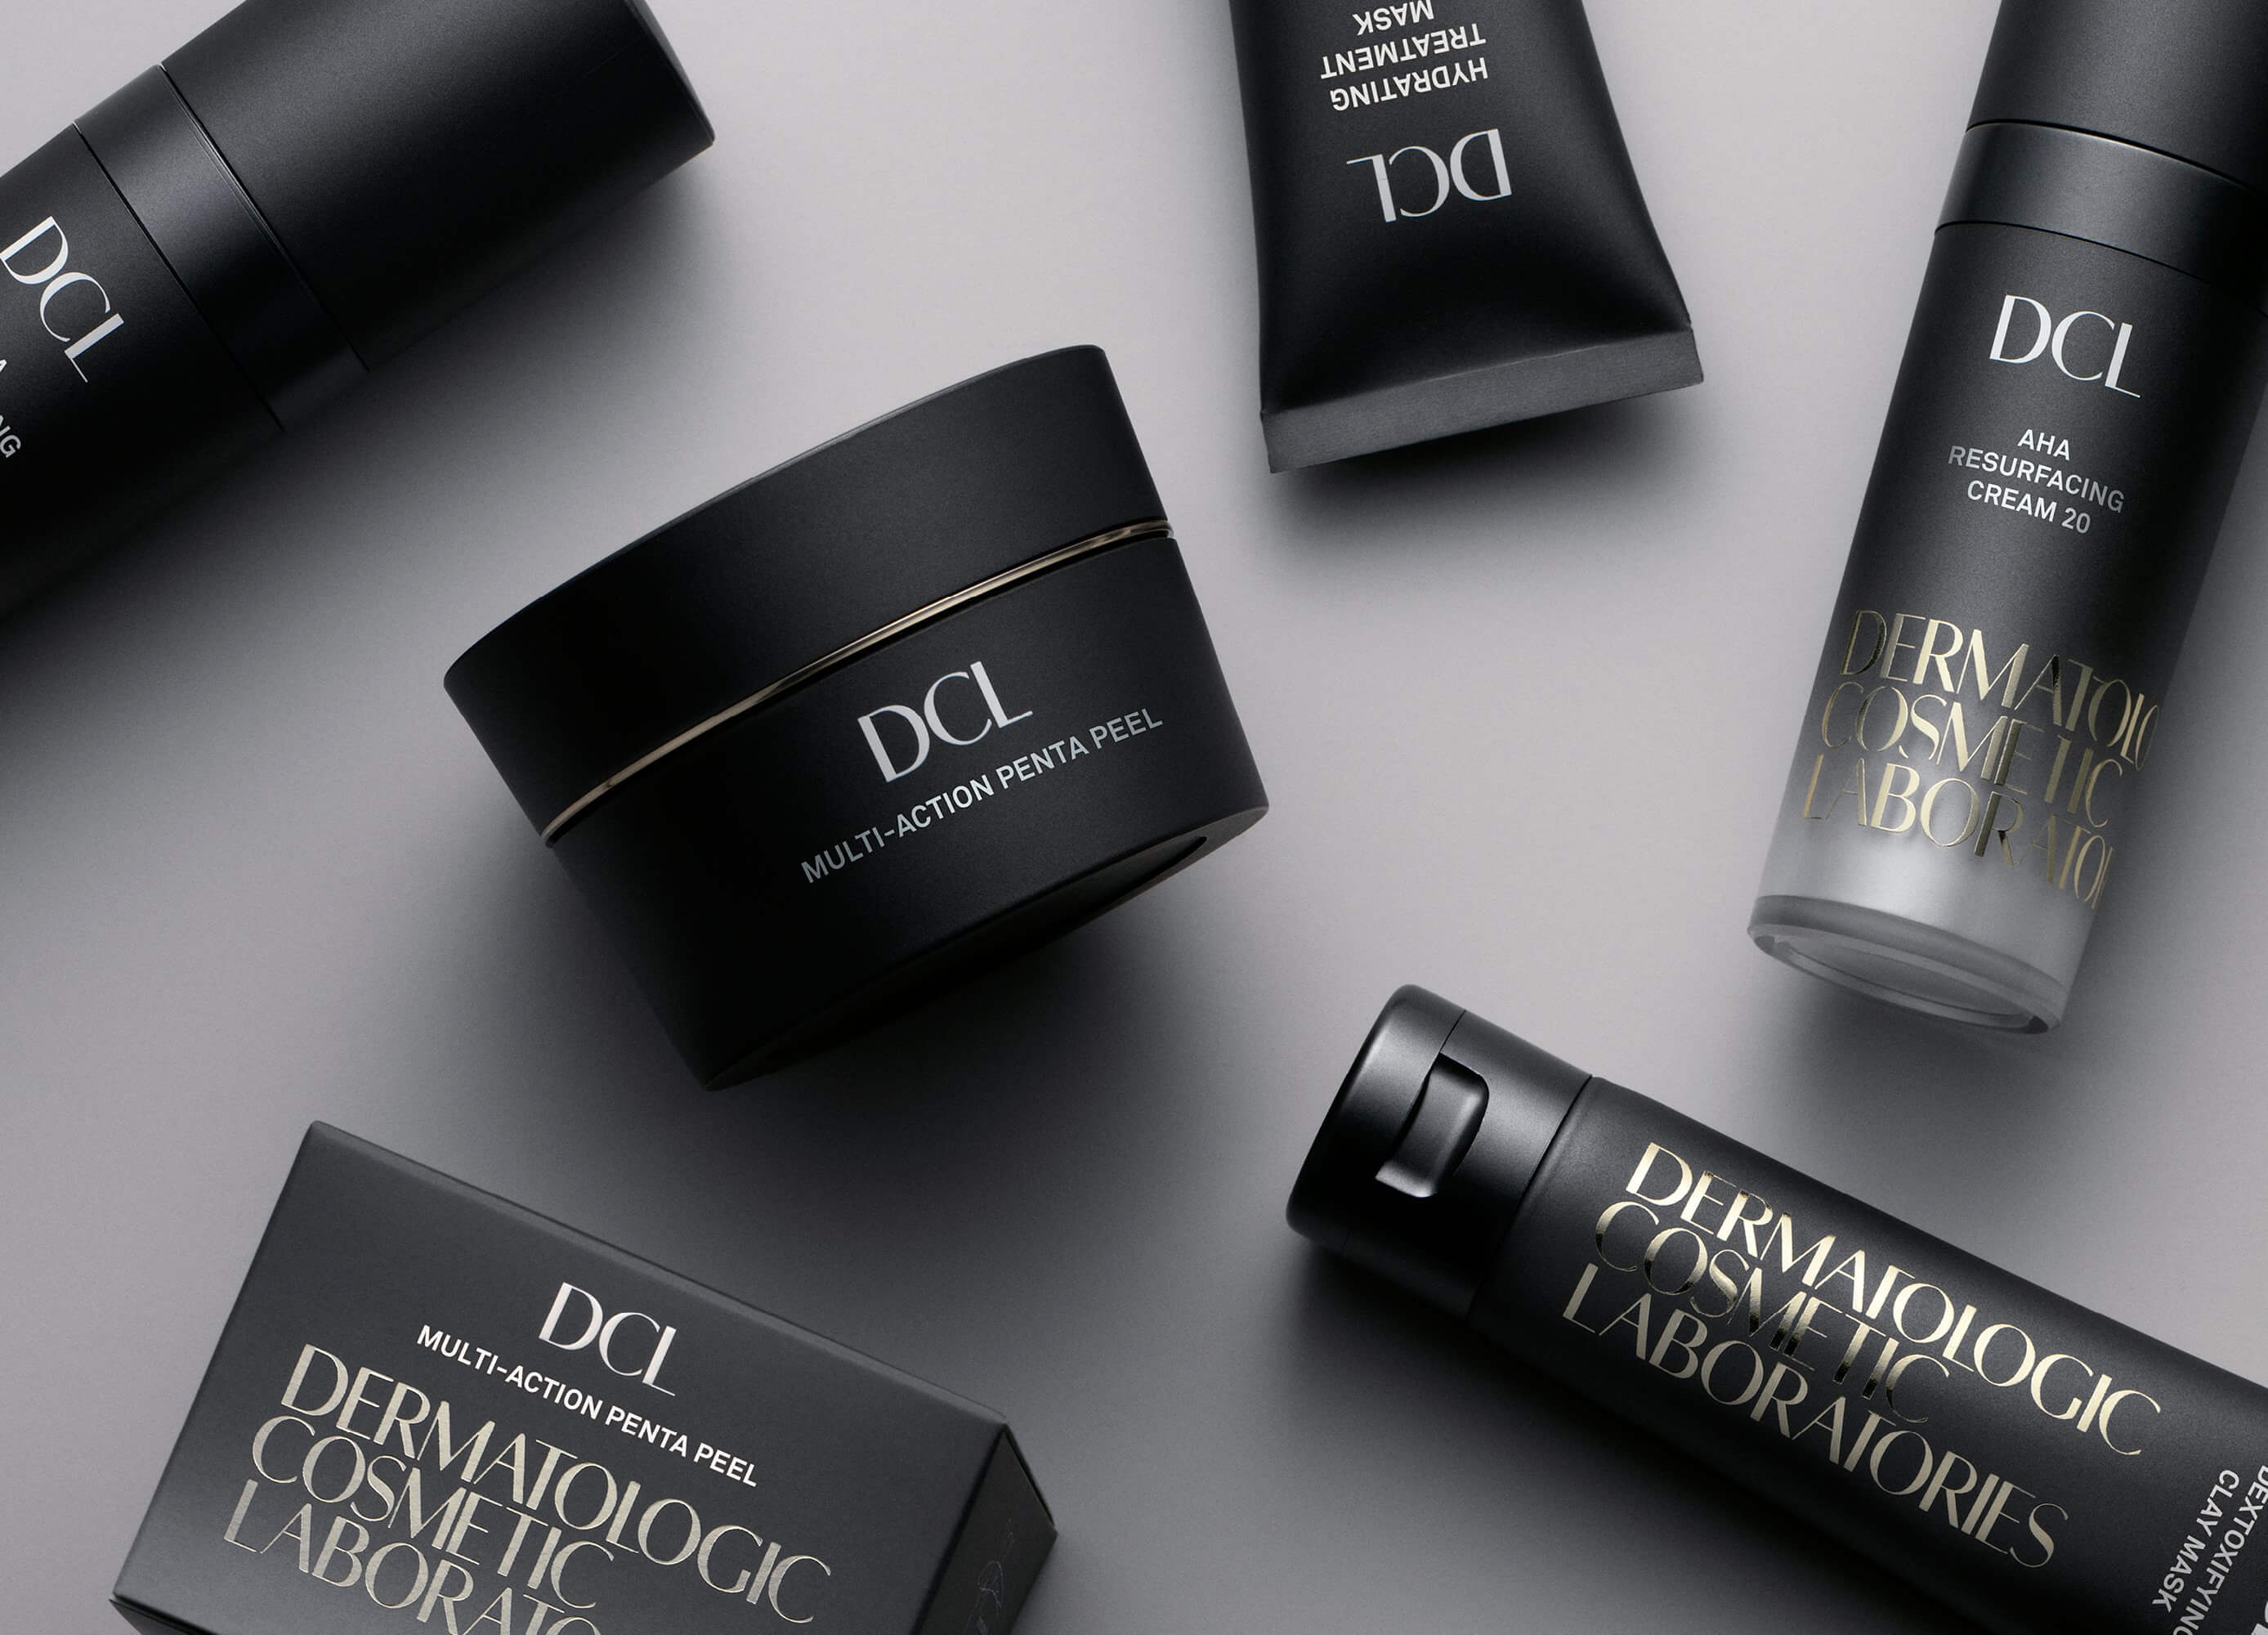 Beautology Online now stock DCL Skincare Products